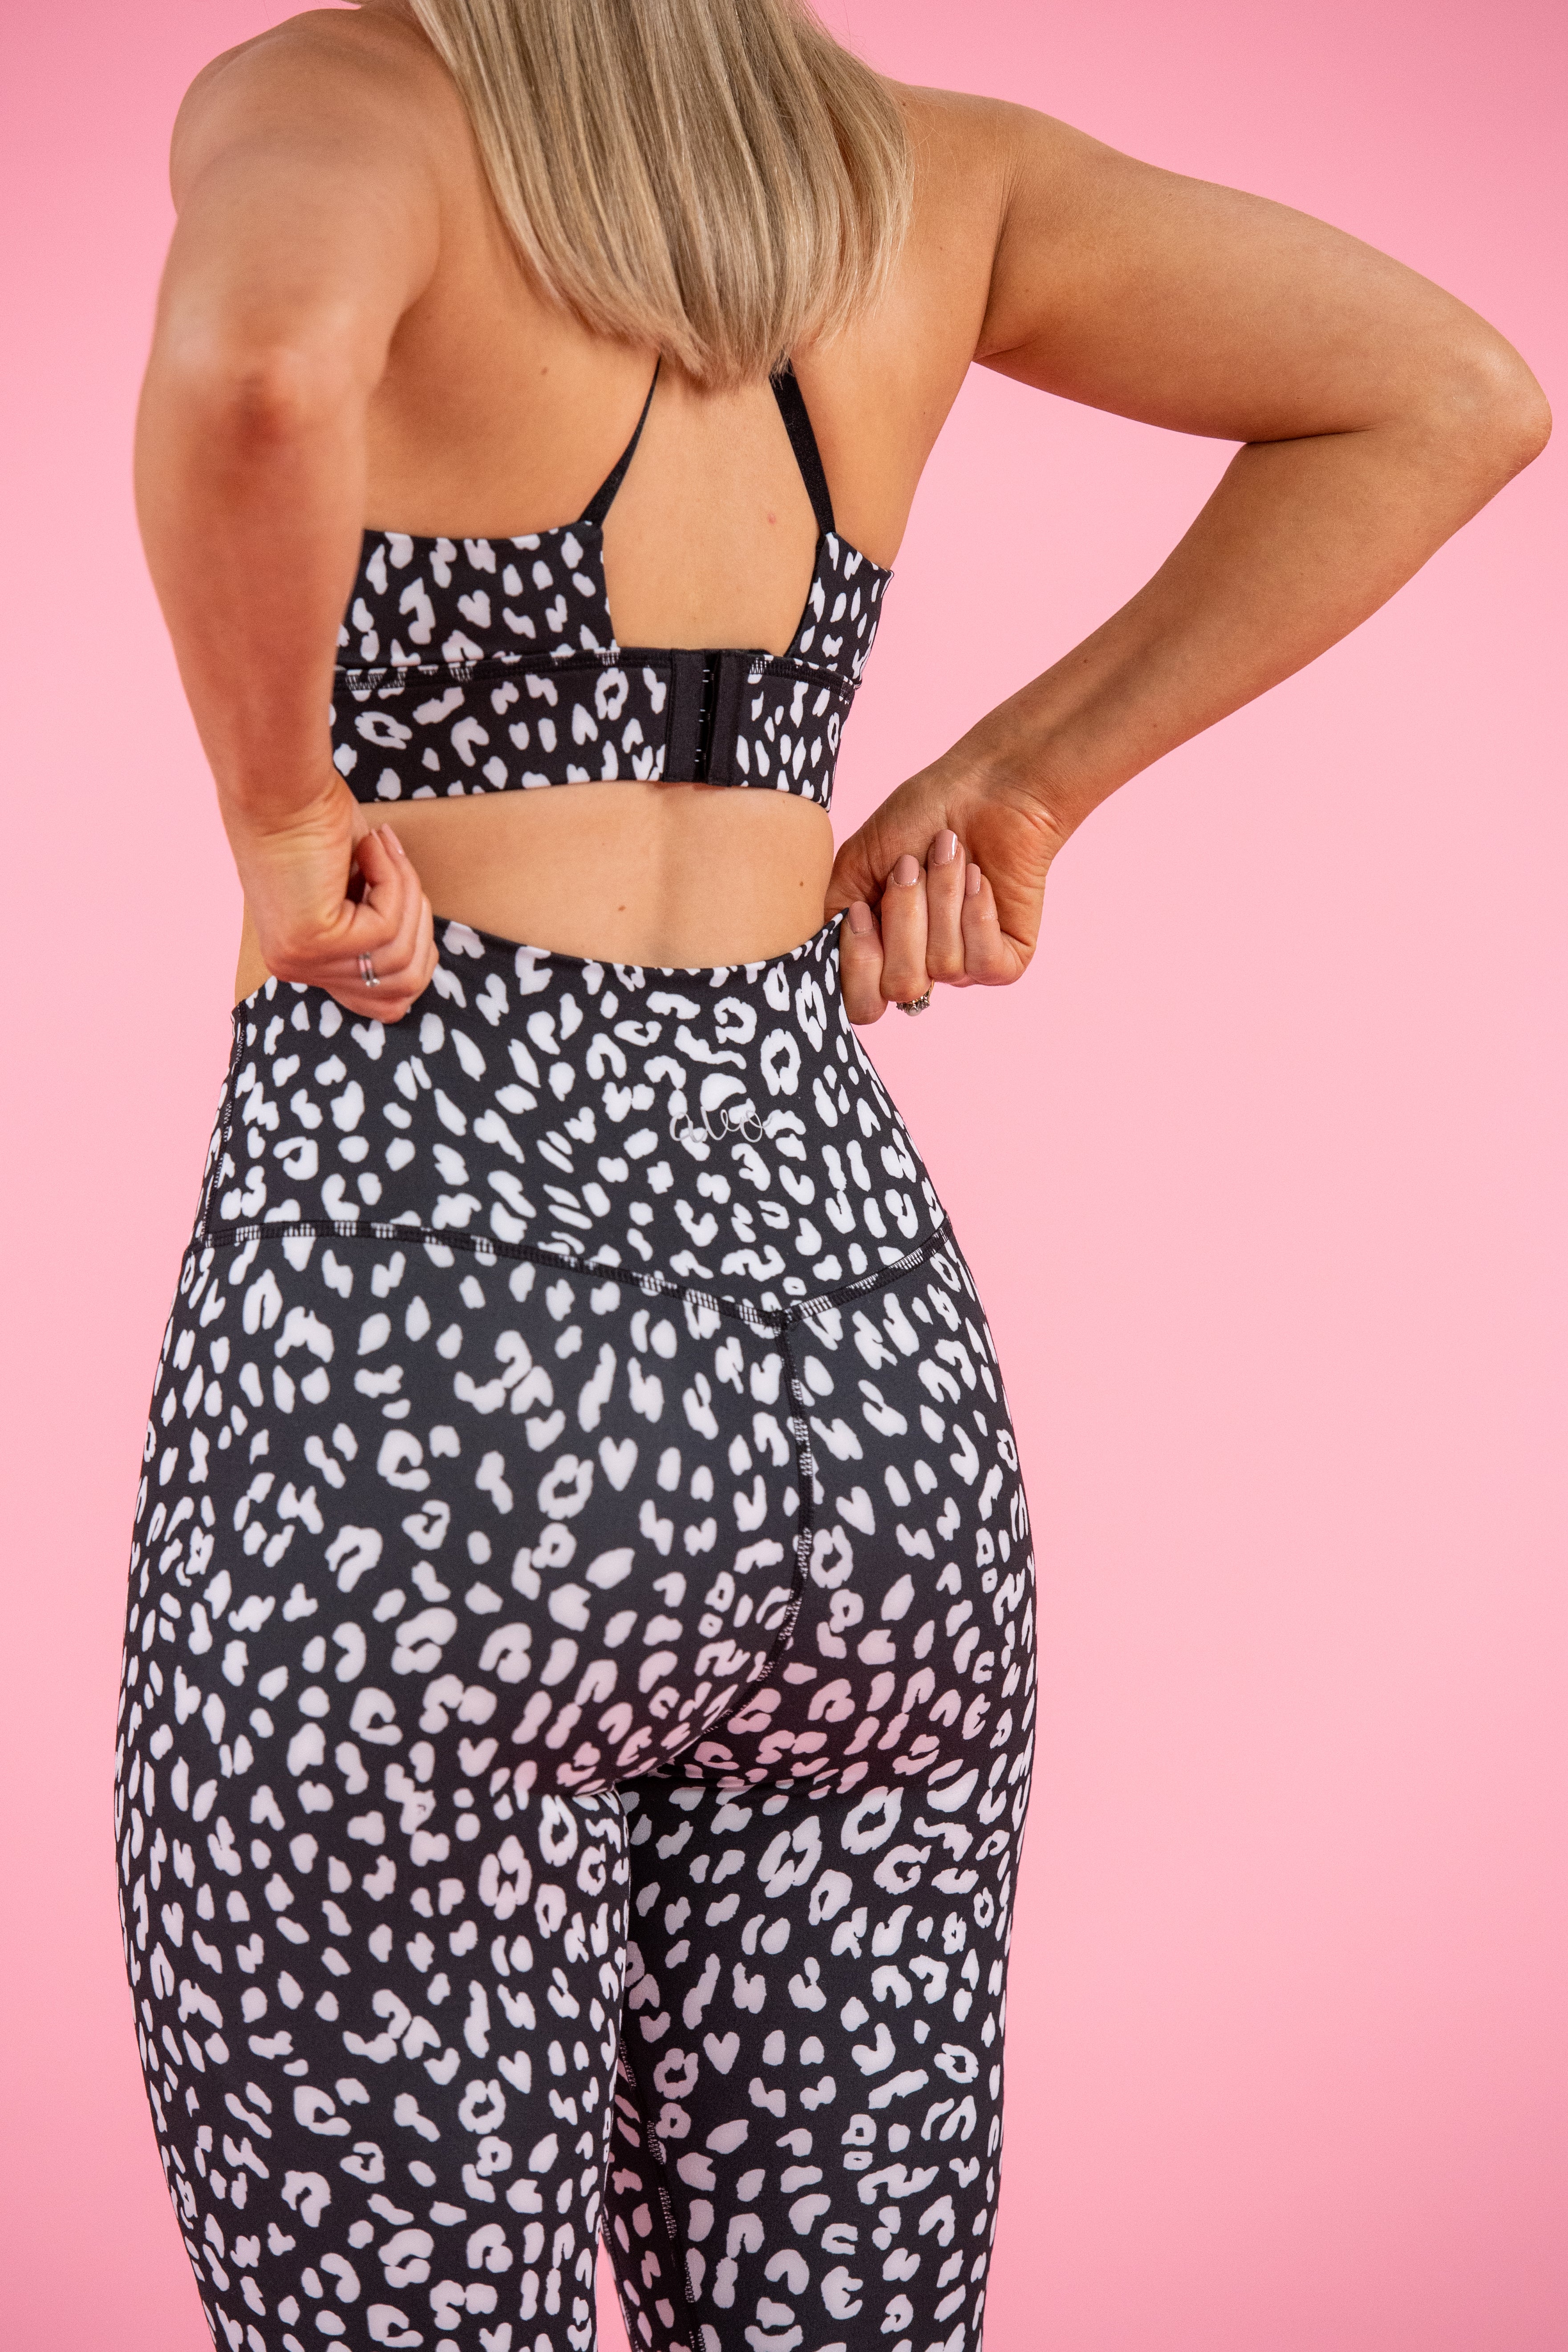 Activewear For Petites